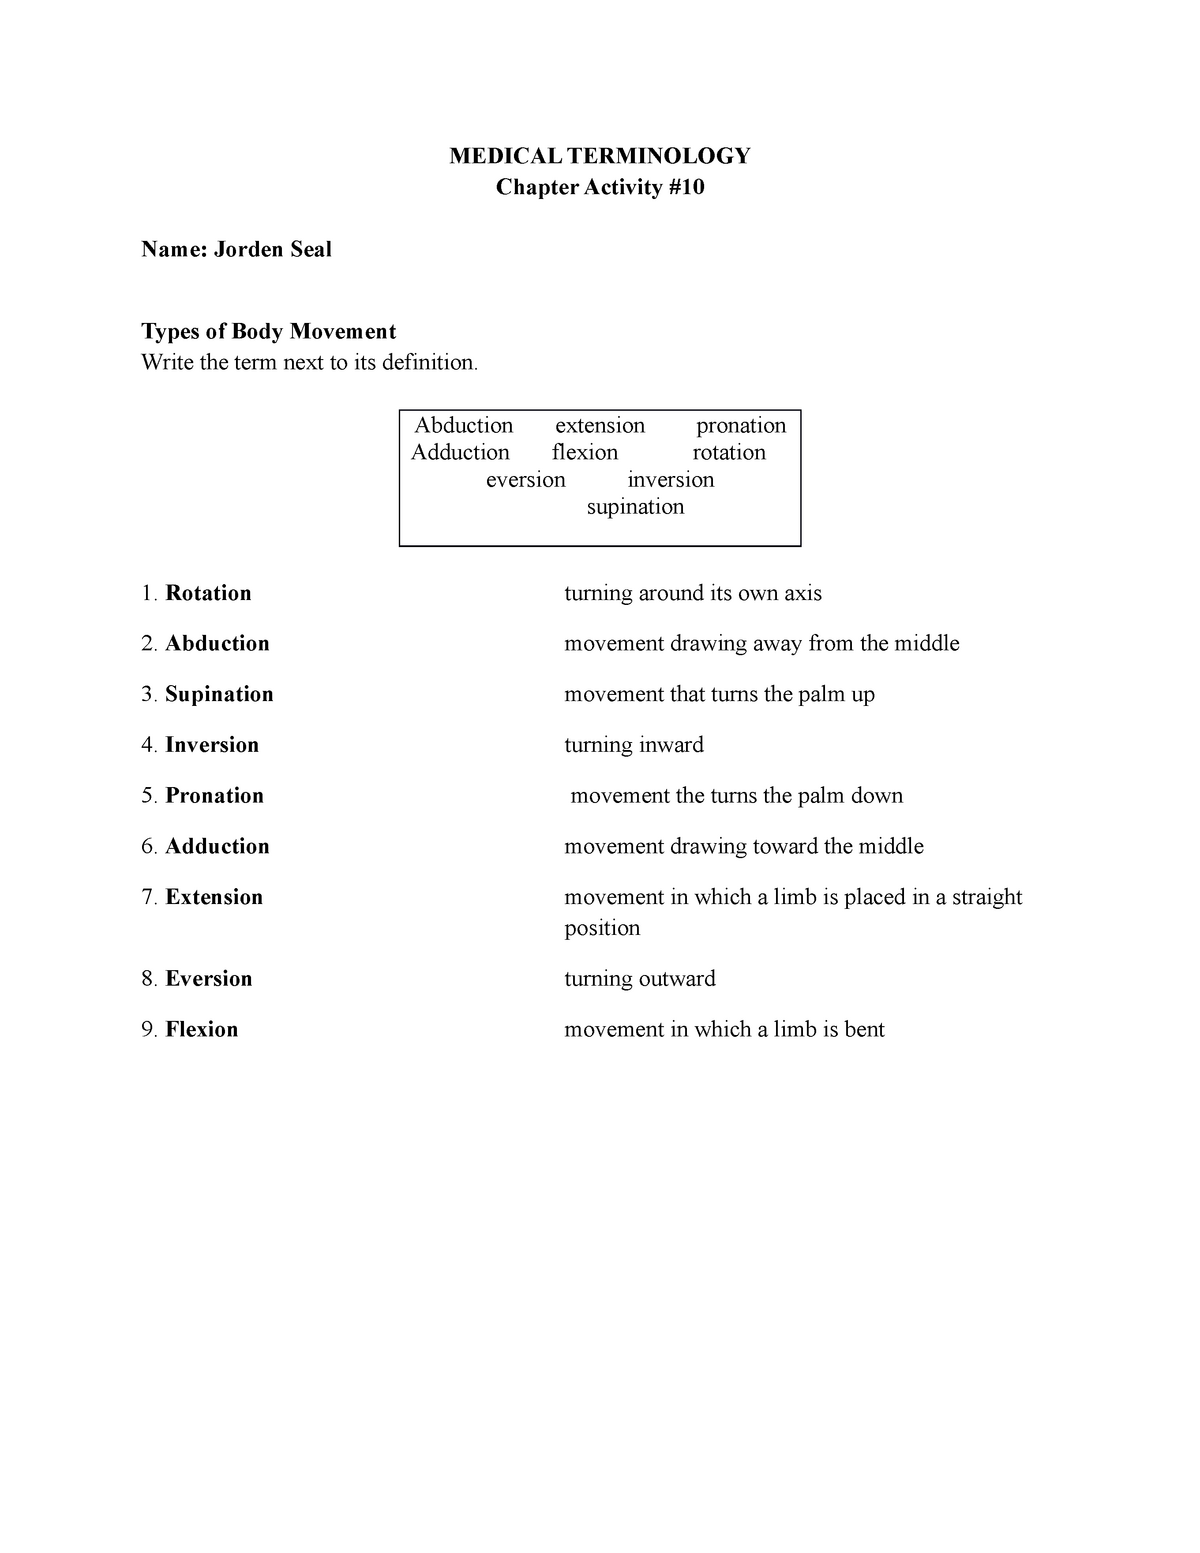 Medical Terminology 10 Chapter Activity 10 MEDICAL TERMINOLOGY